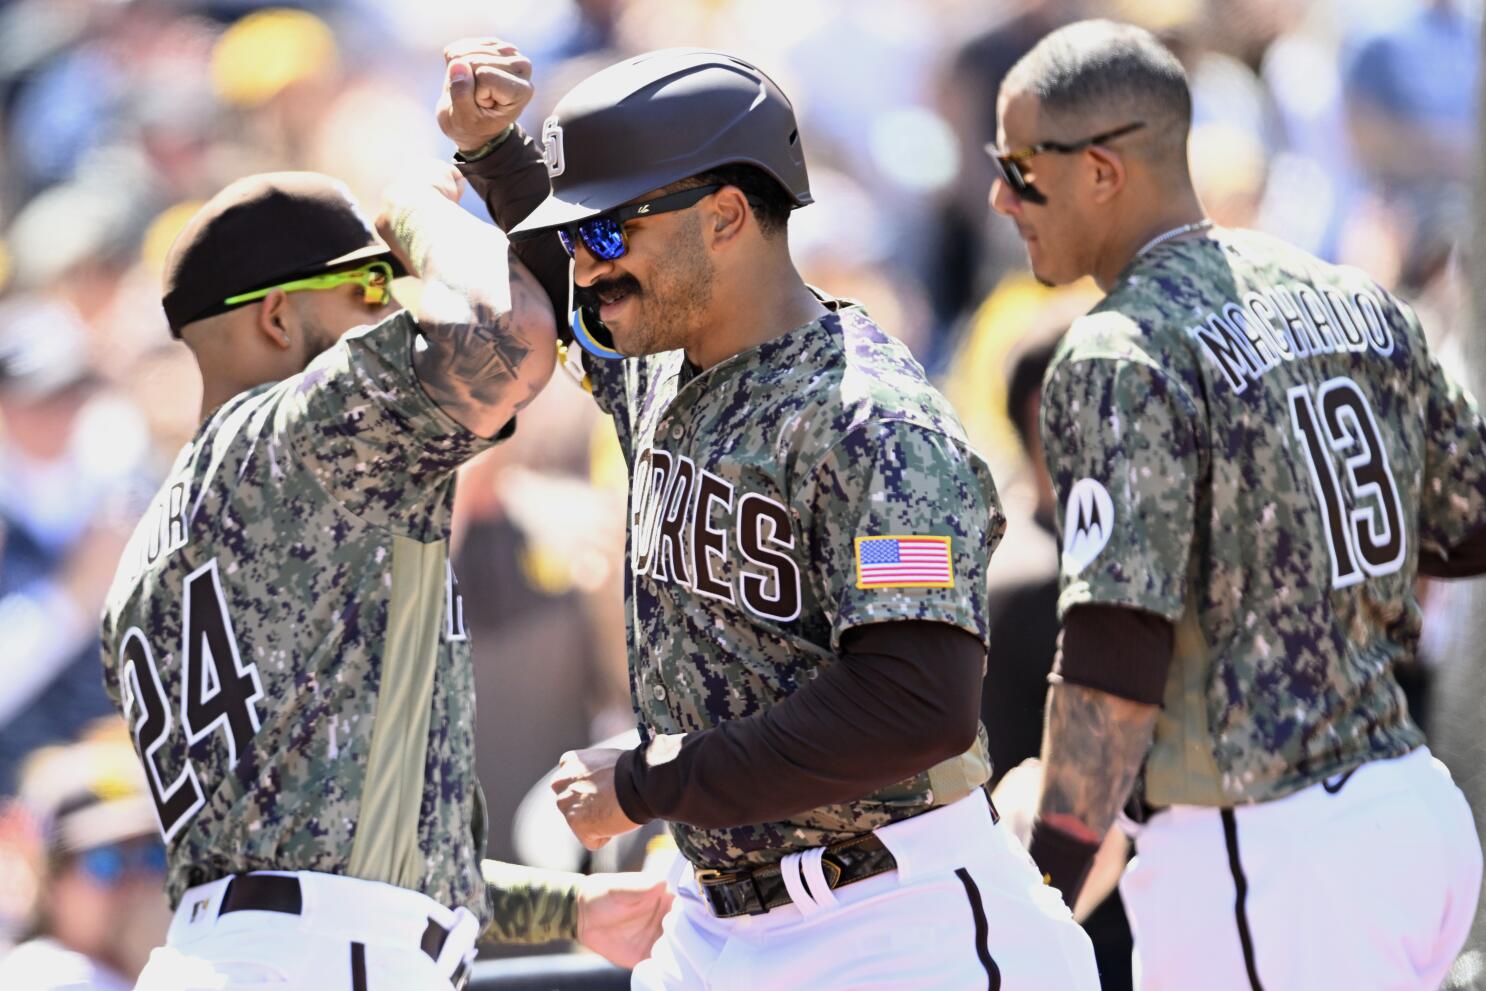 MLB All-Stars should be wearing their own team's uniforms in